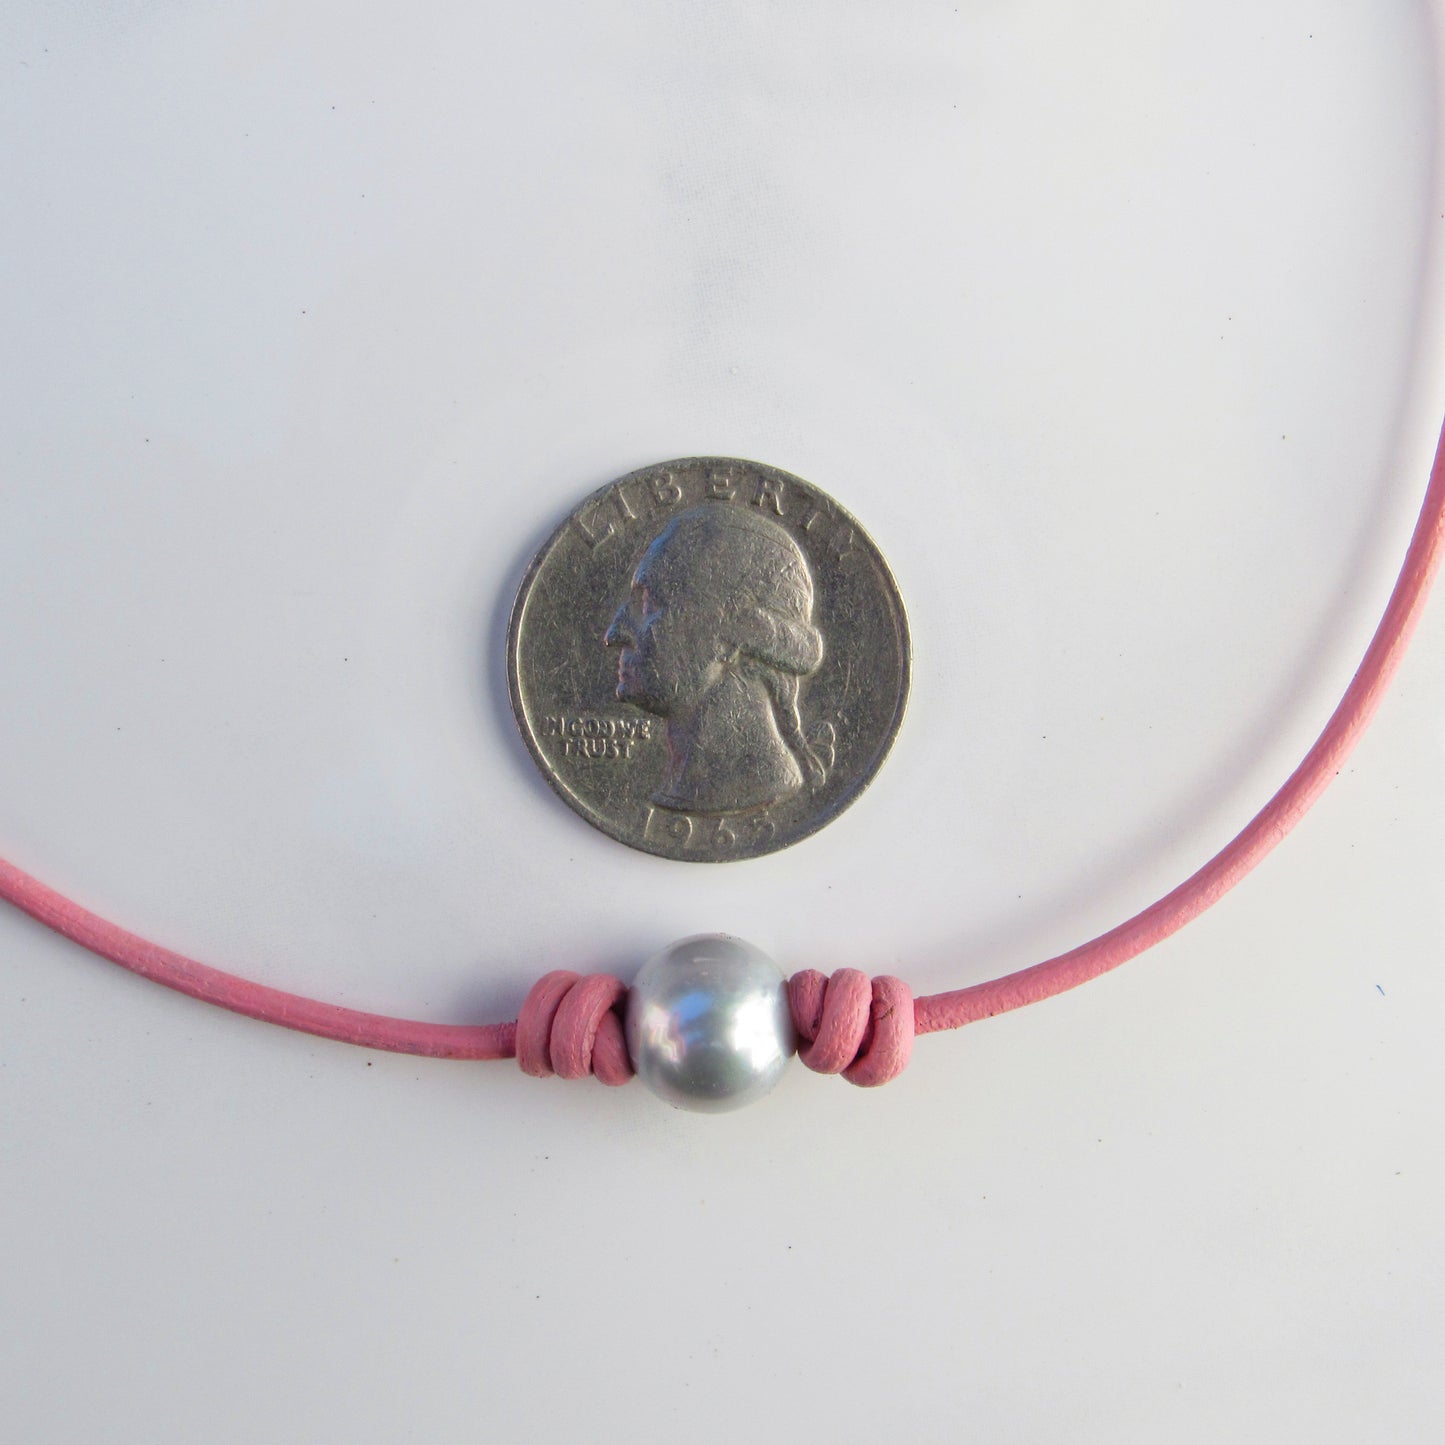 Freshwater Pearl Choker on Pink Leather with Sterling Silver Clasp